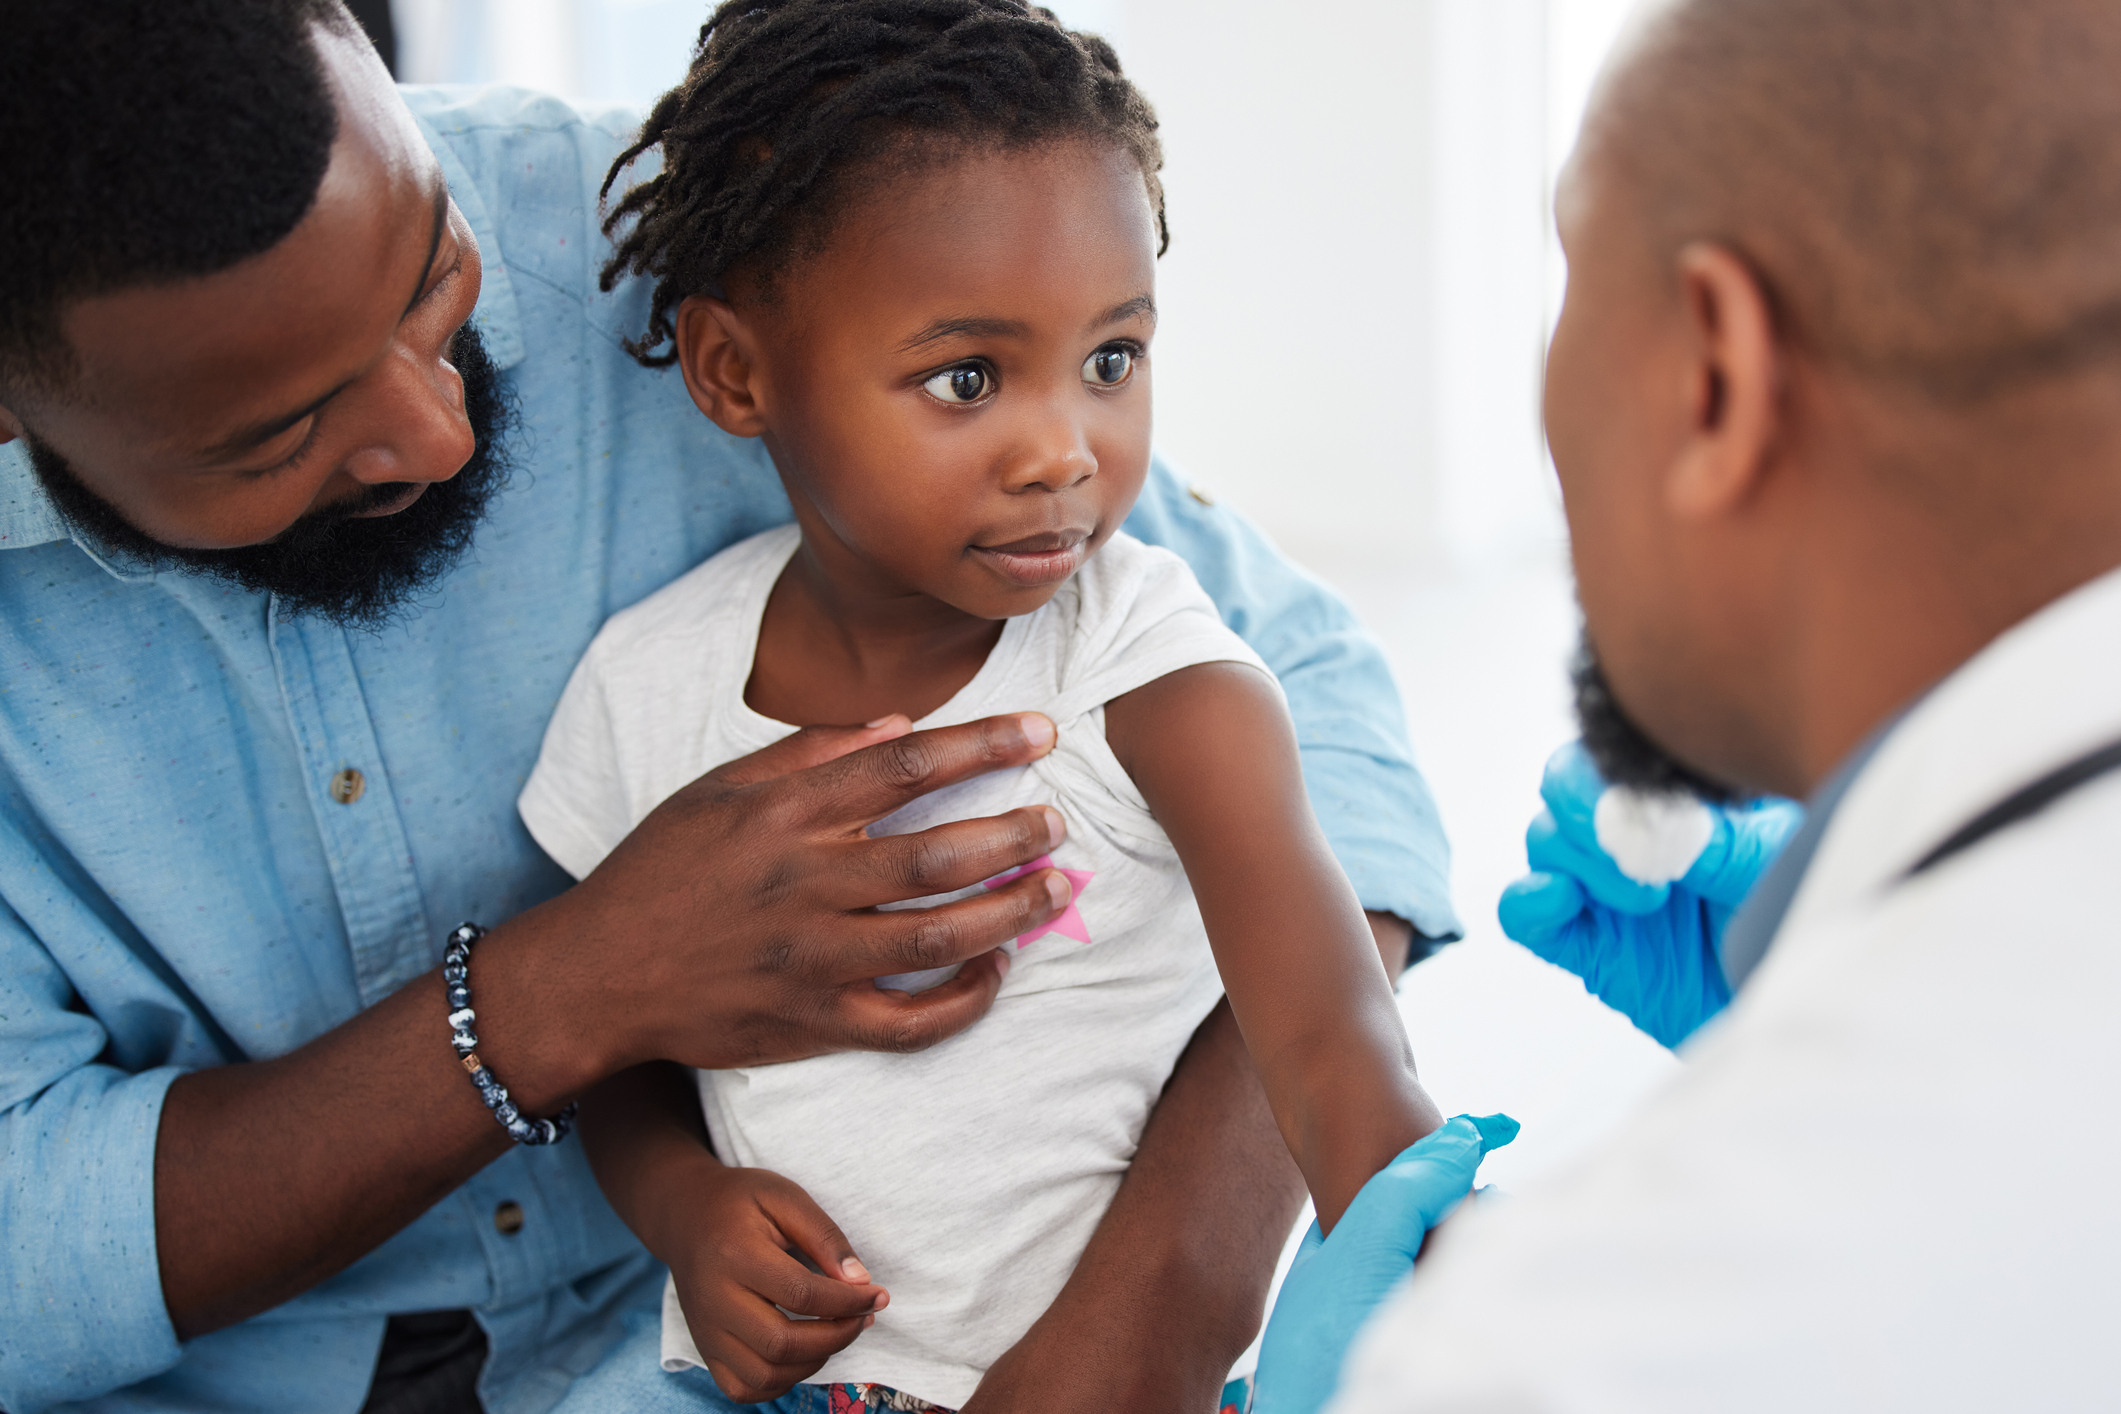 A young Black father protectively holding his toddler daughter while she looks up at a doctor with a nervous expression